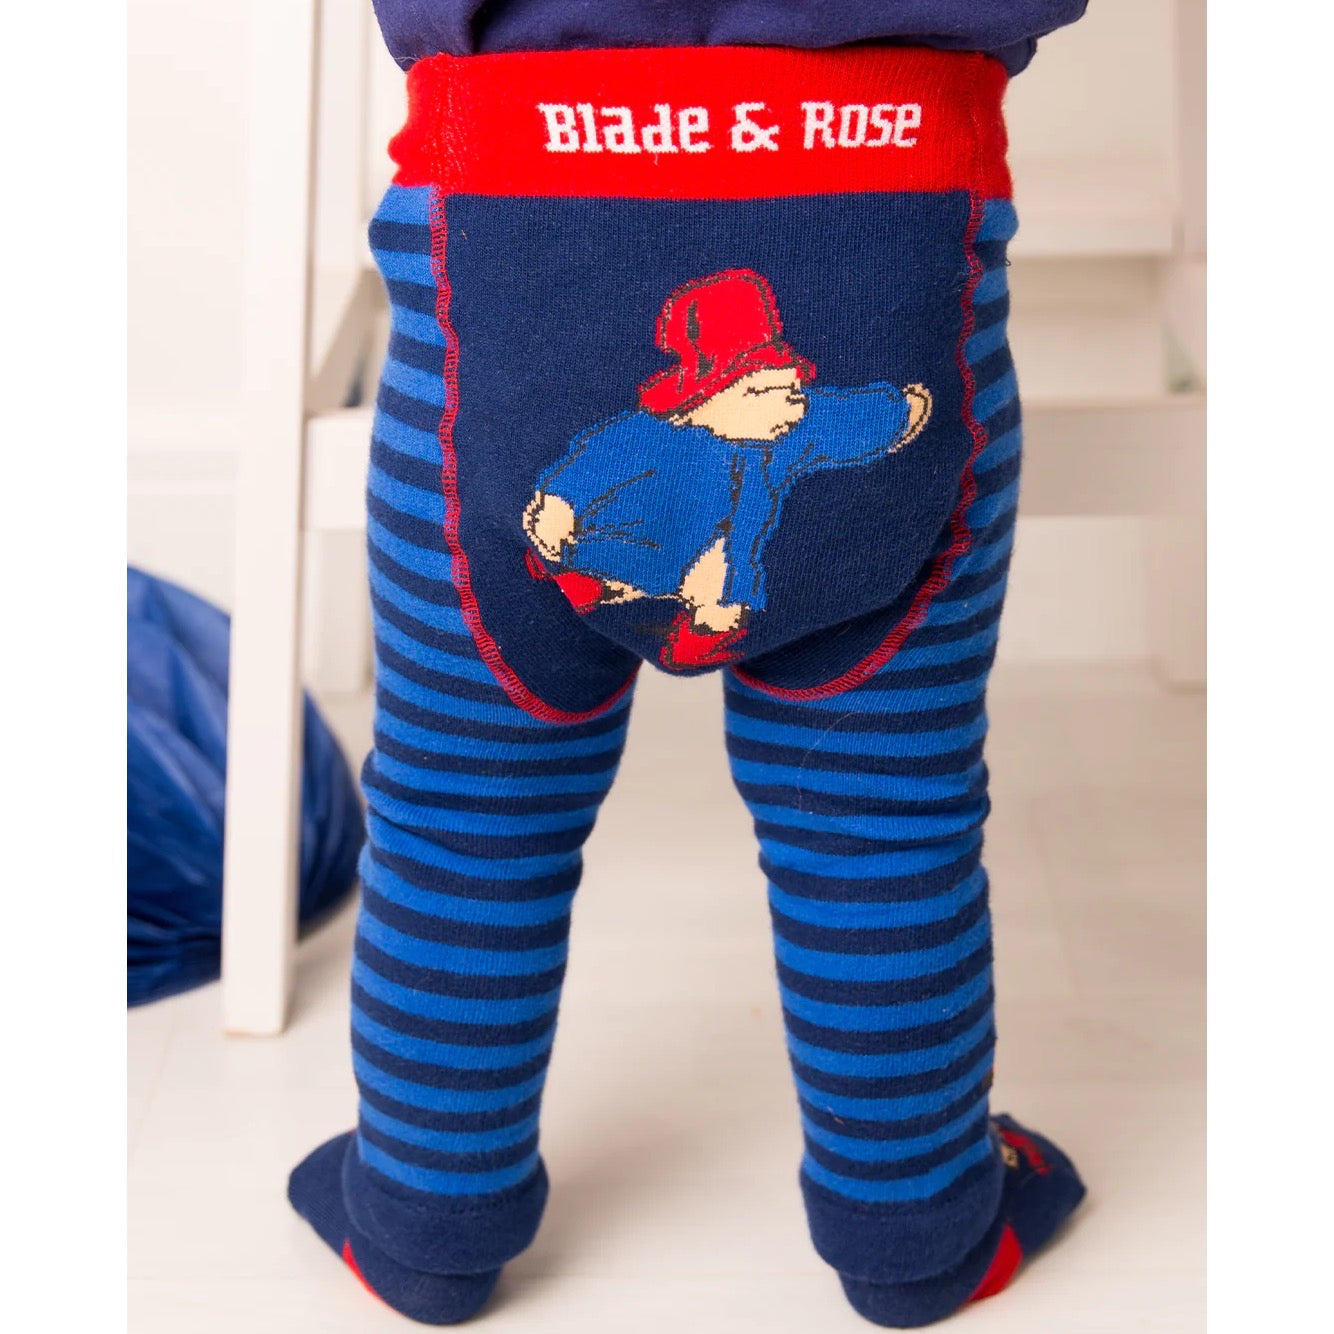 Blade & Rose Paddington Out And About Infant Knitted Leggings Clothing 0-6M / Blue,6-12M / Blue,12-24M / Blue